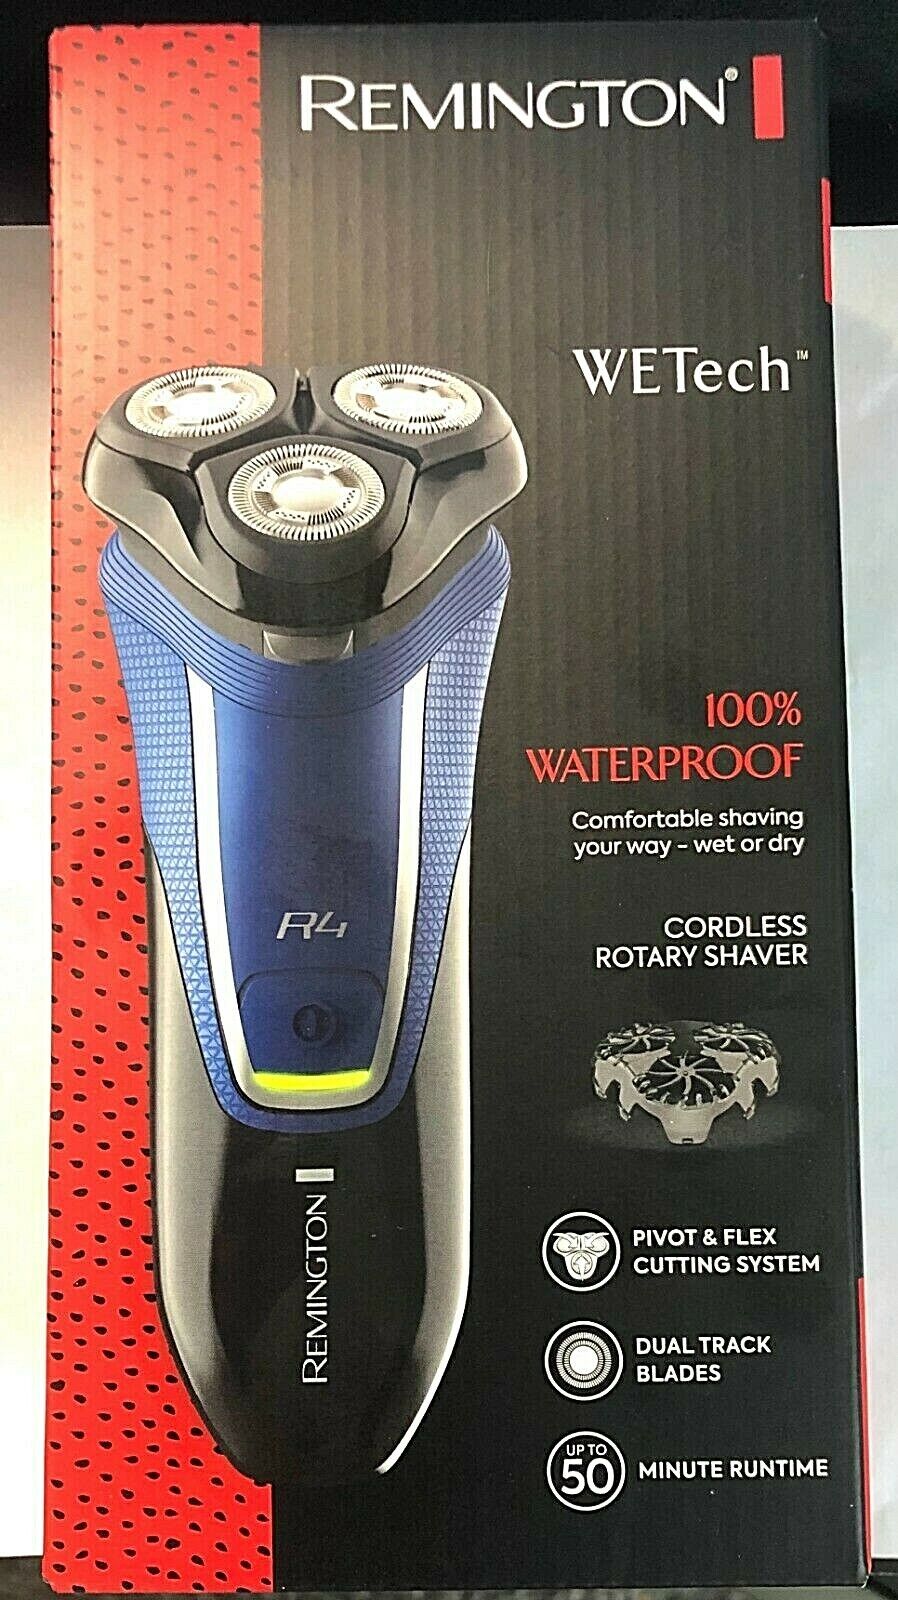 Remington R4000 Cordless Rotary Men's Electric Shaver, WETech 100% Waterproof